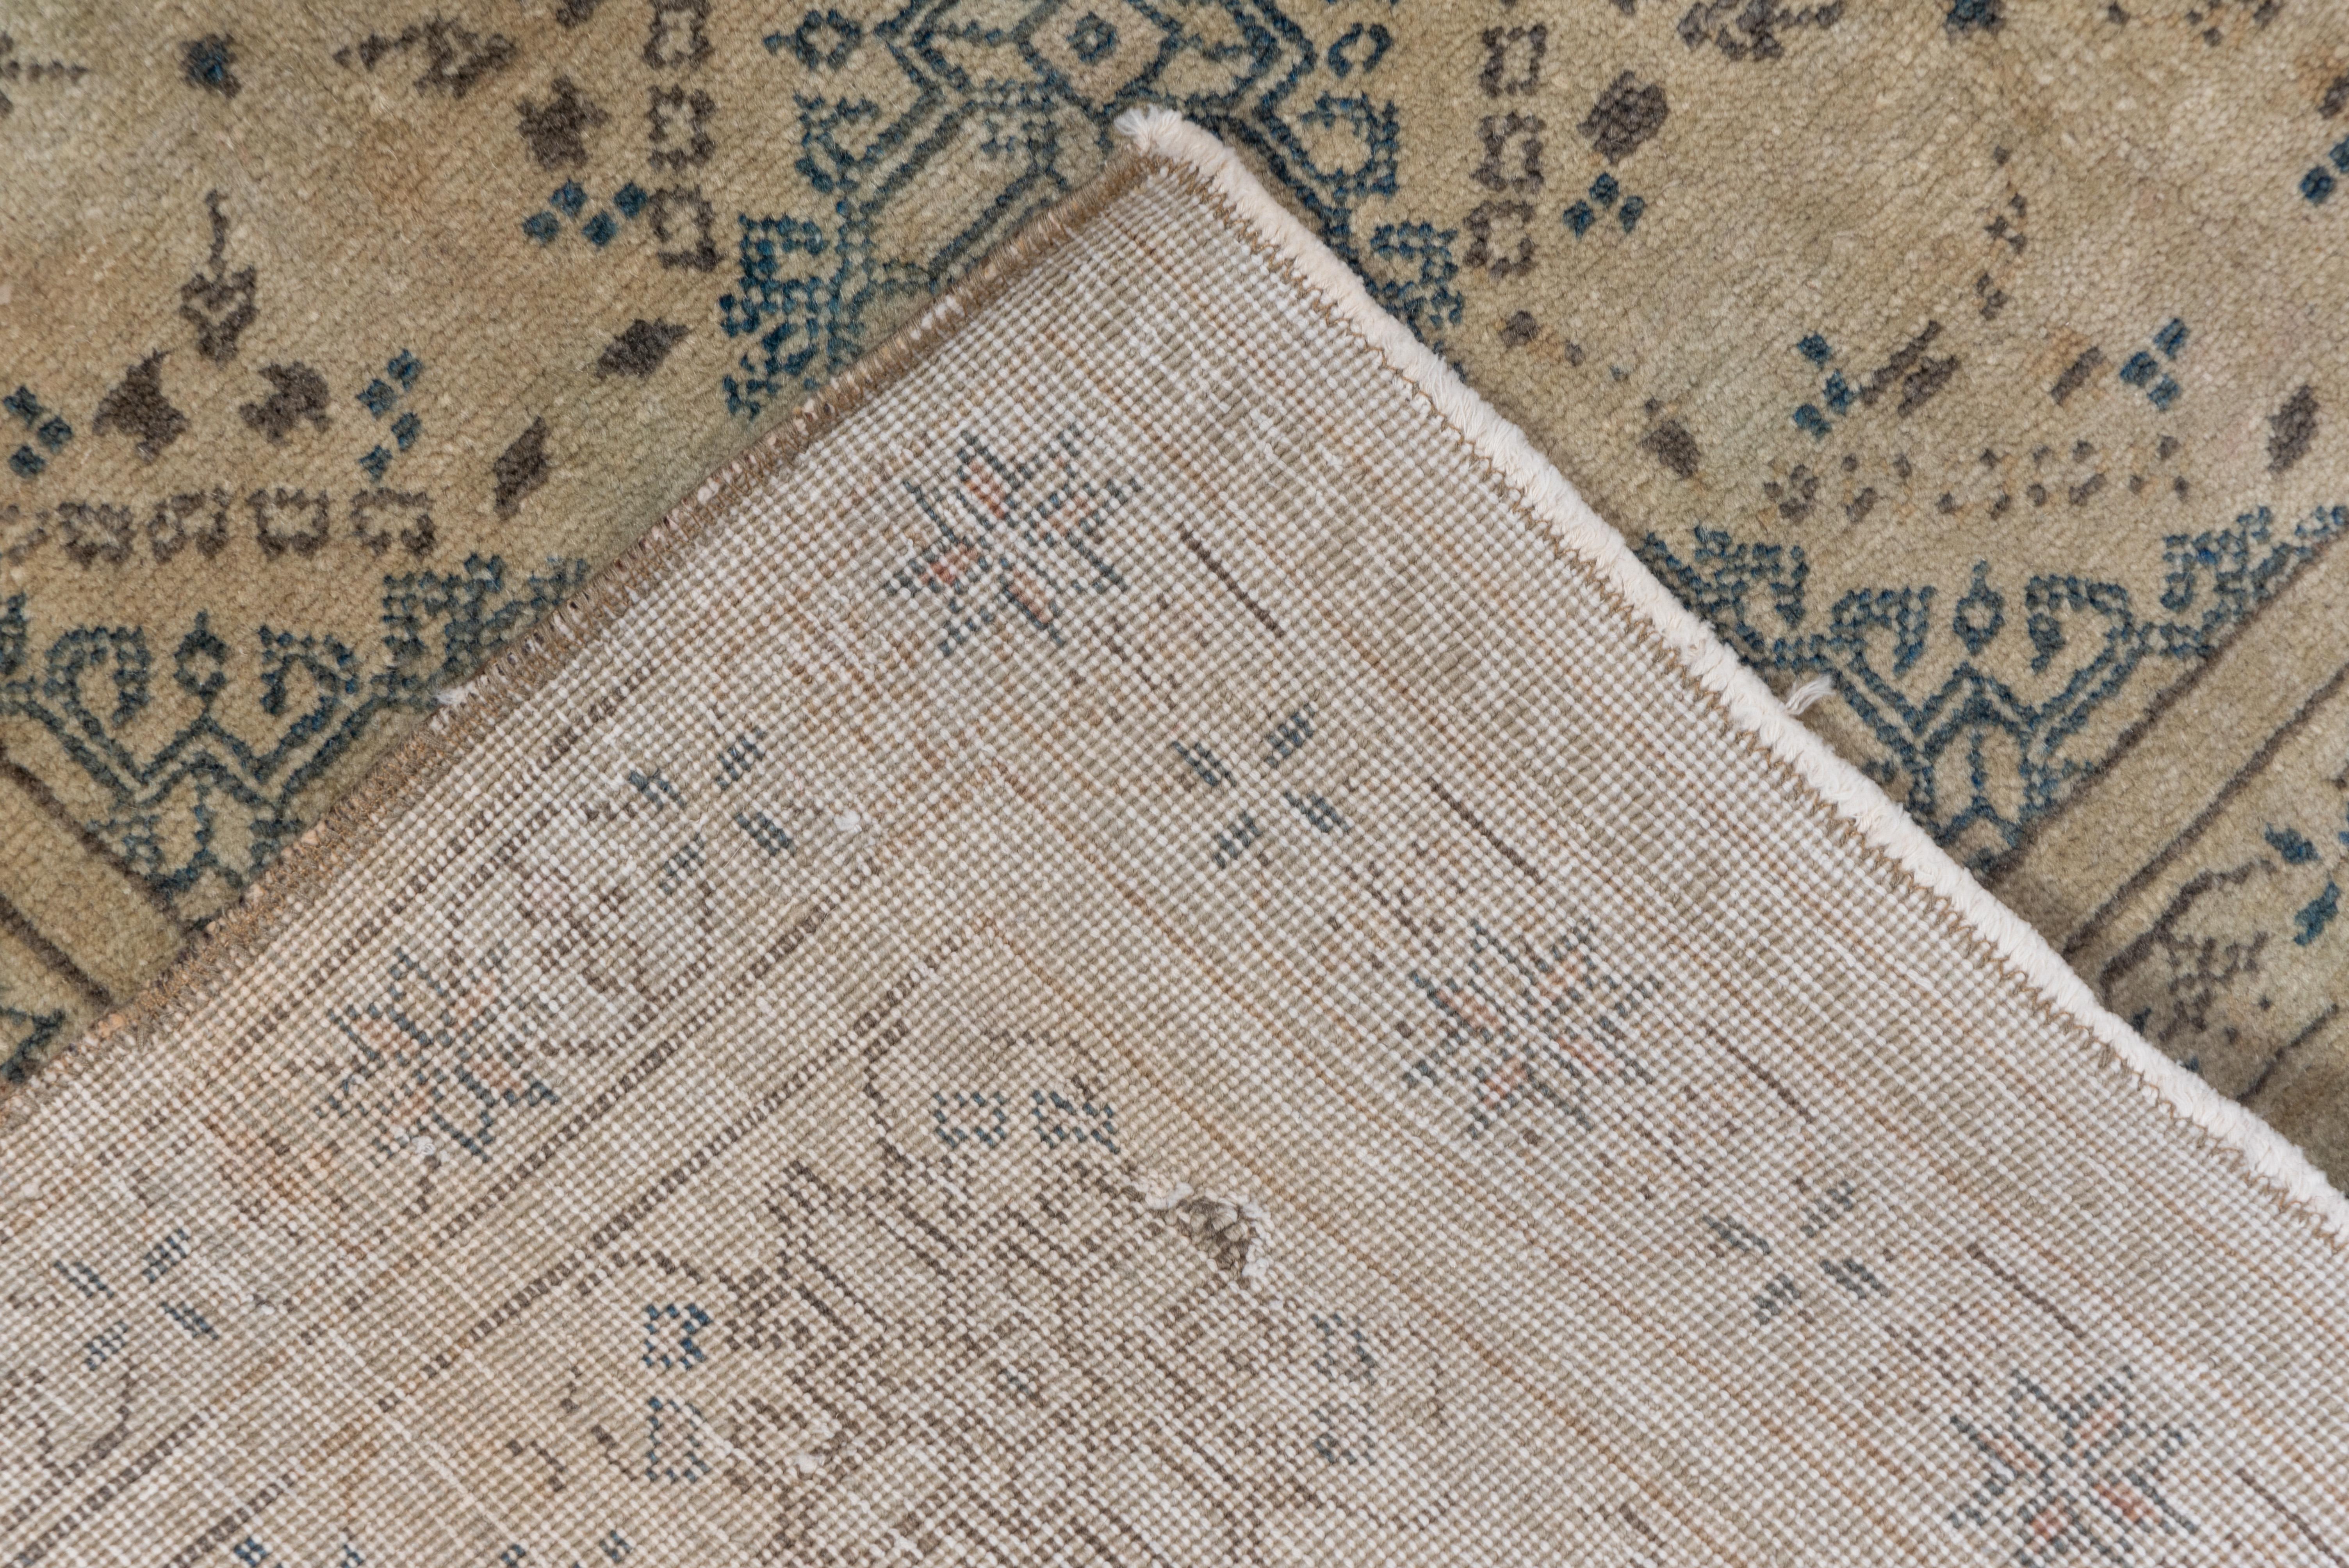 The overall green and earth toned rug shows columns and rows of the Turkmen 